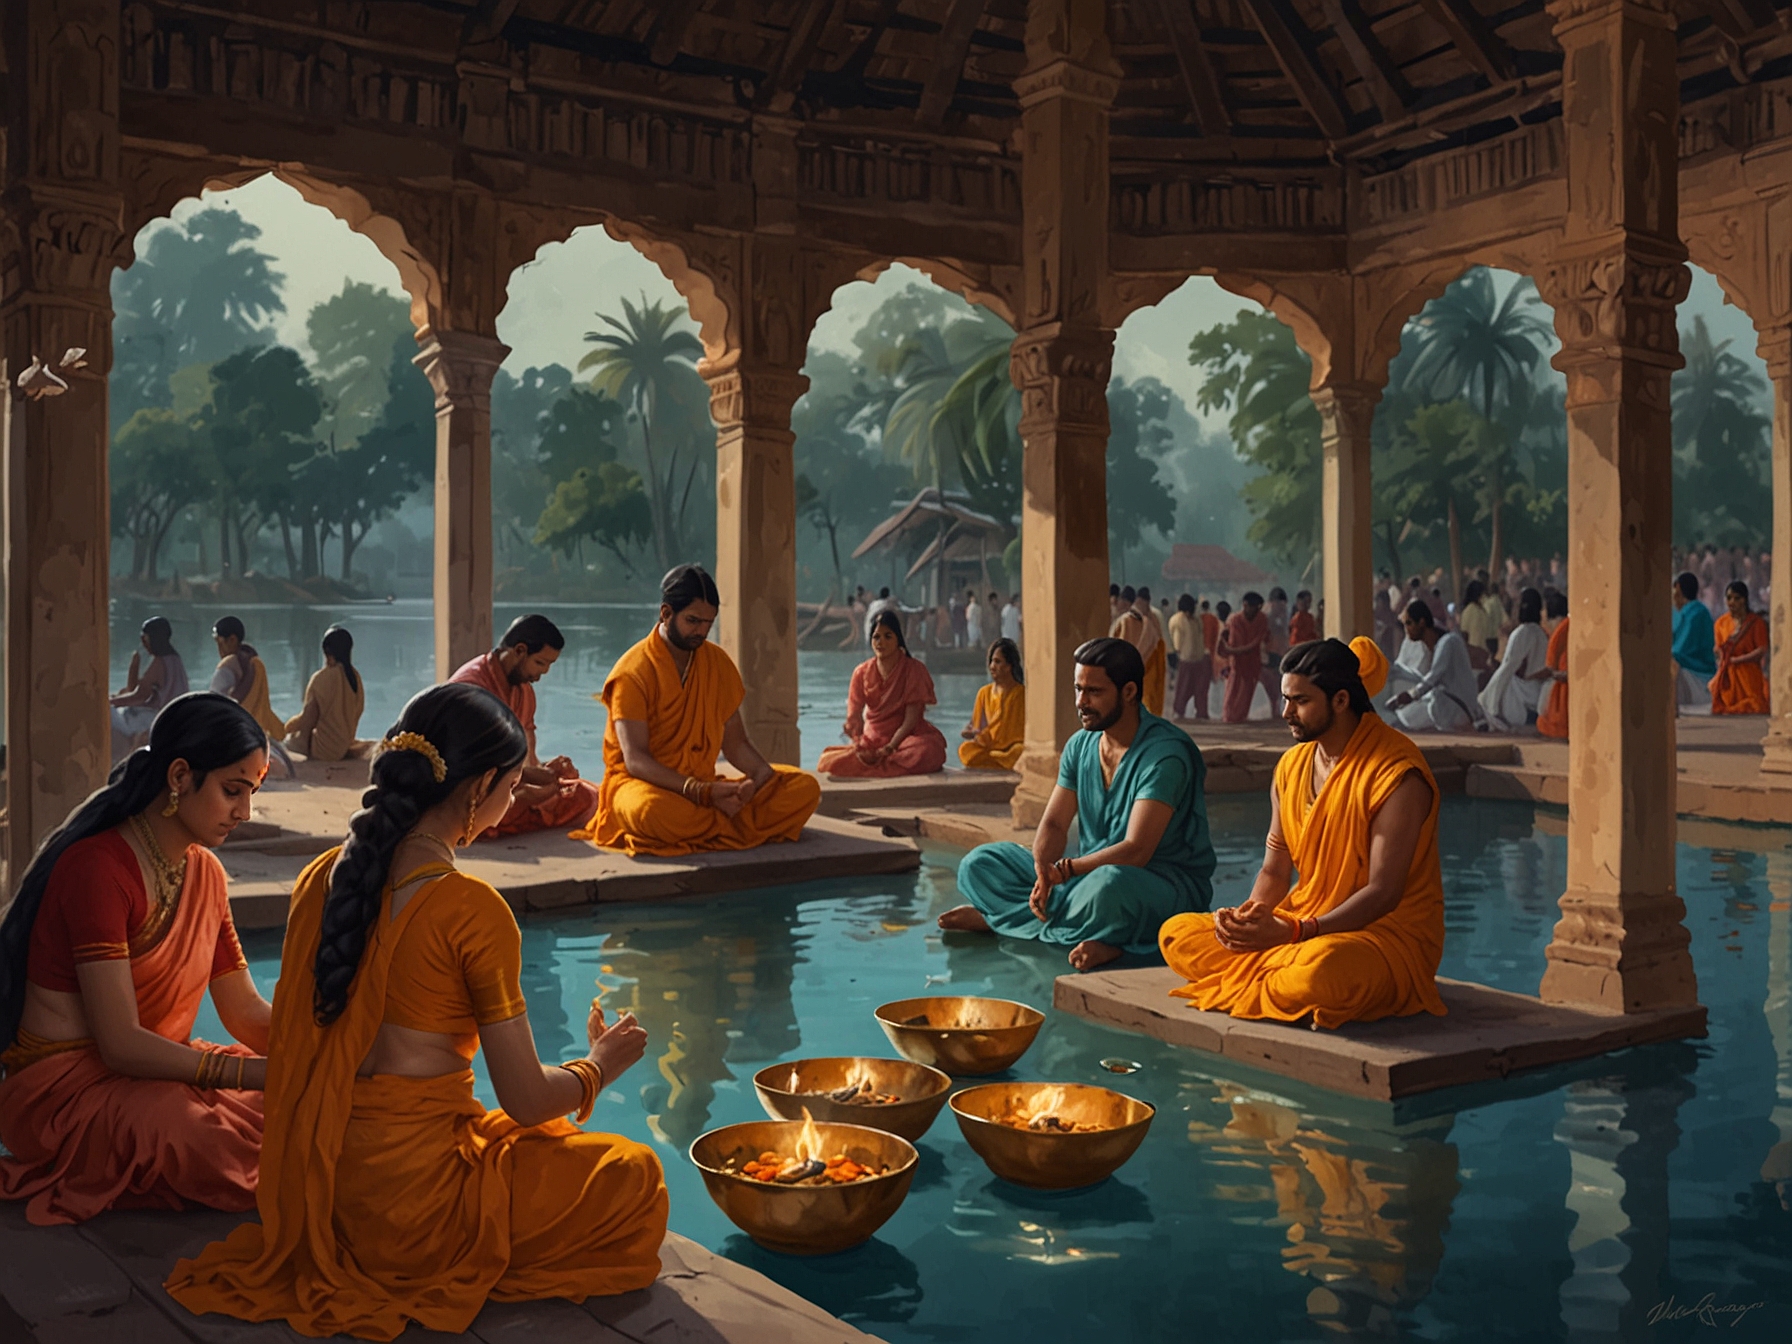 Illustration of devotees observing Nirjala Ekadashi by performing rituals and prayers to Lord Vishnu, emphasizing the day's spiritual activities and total abstinence from food and water.